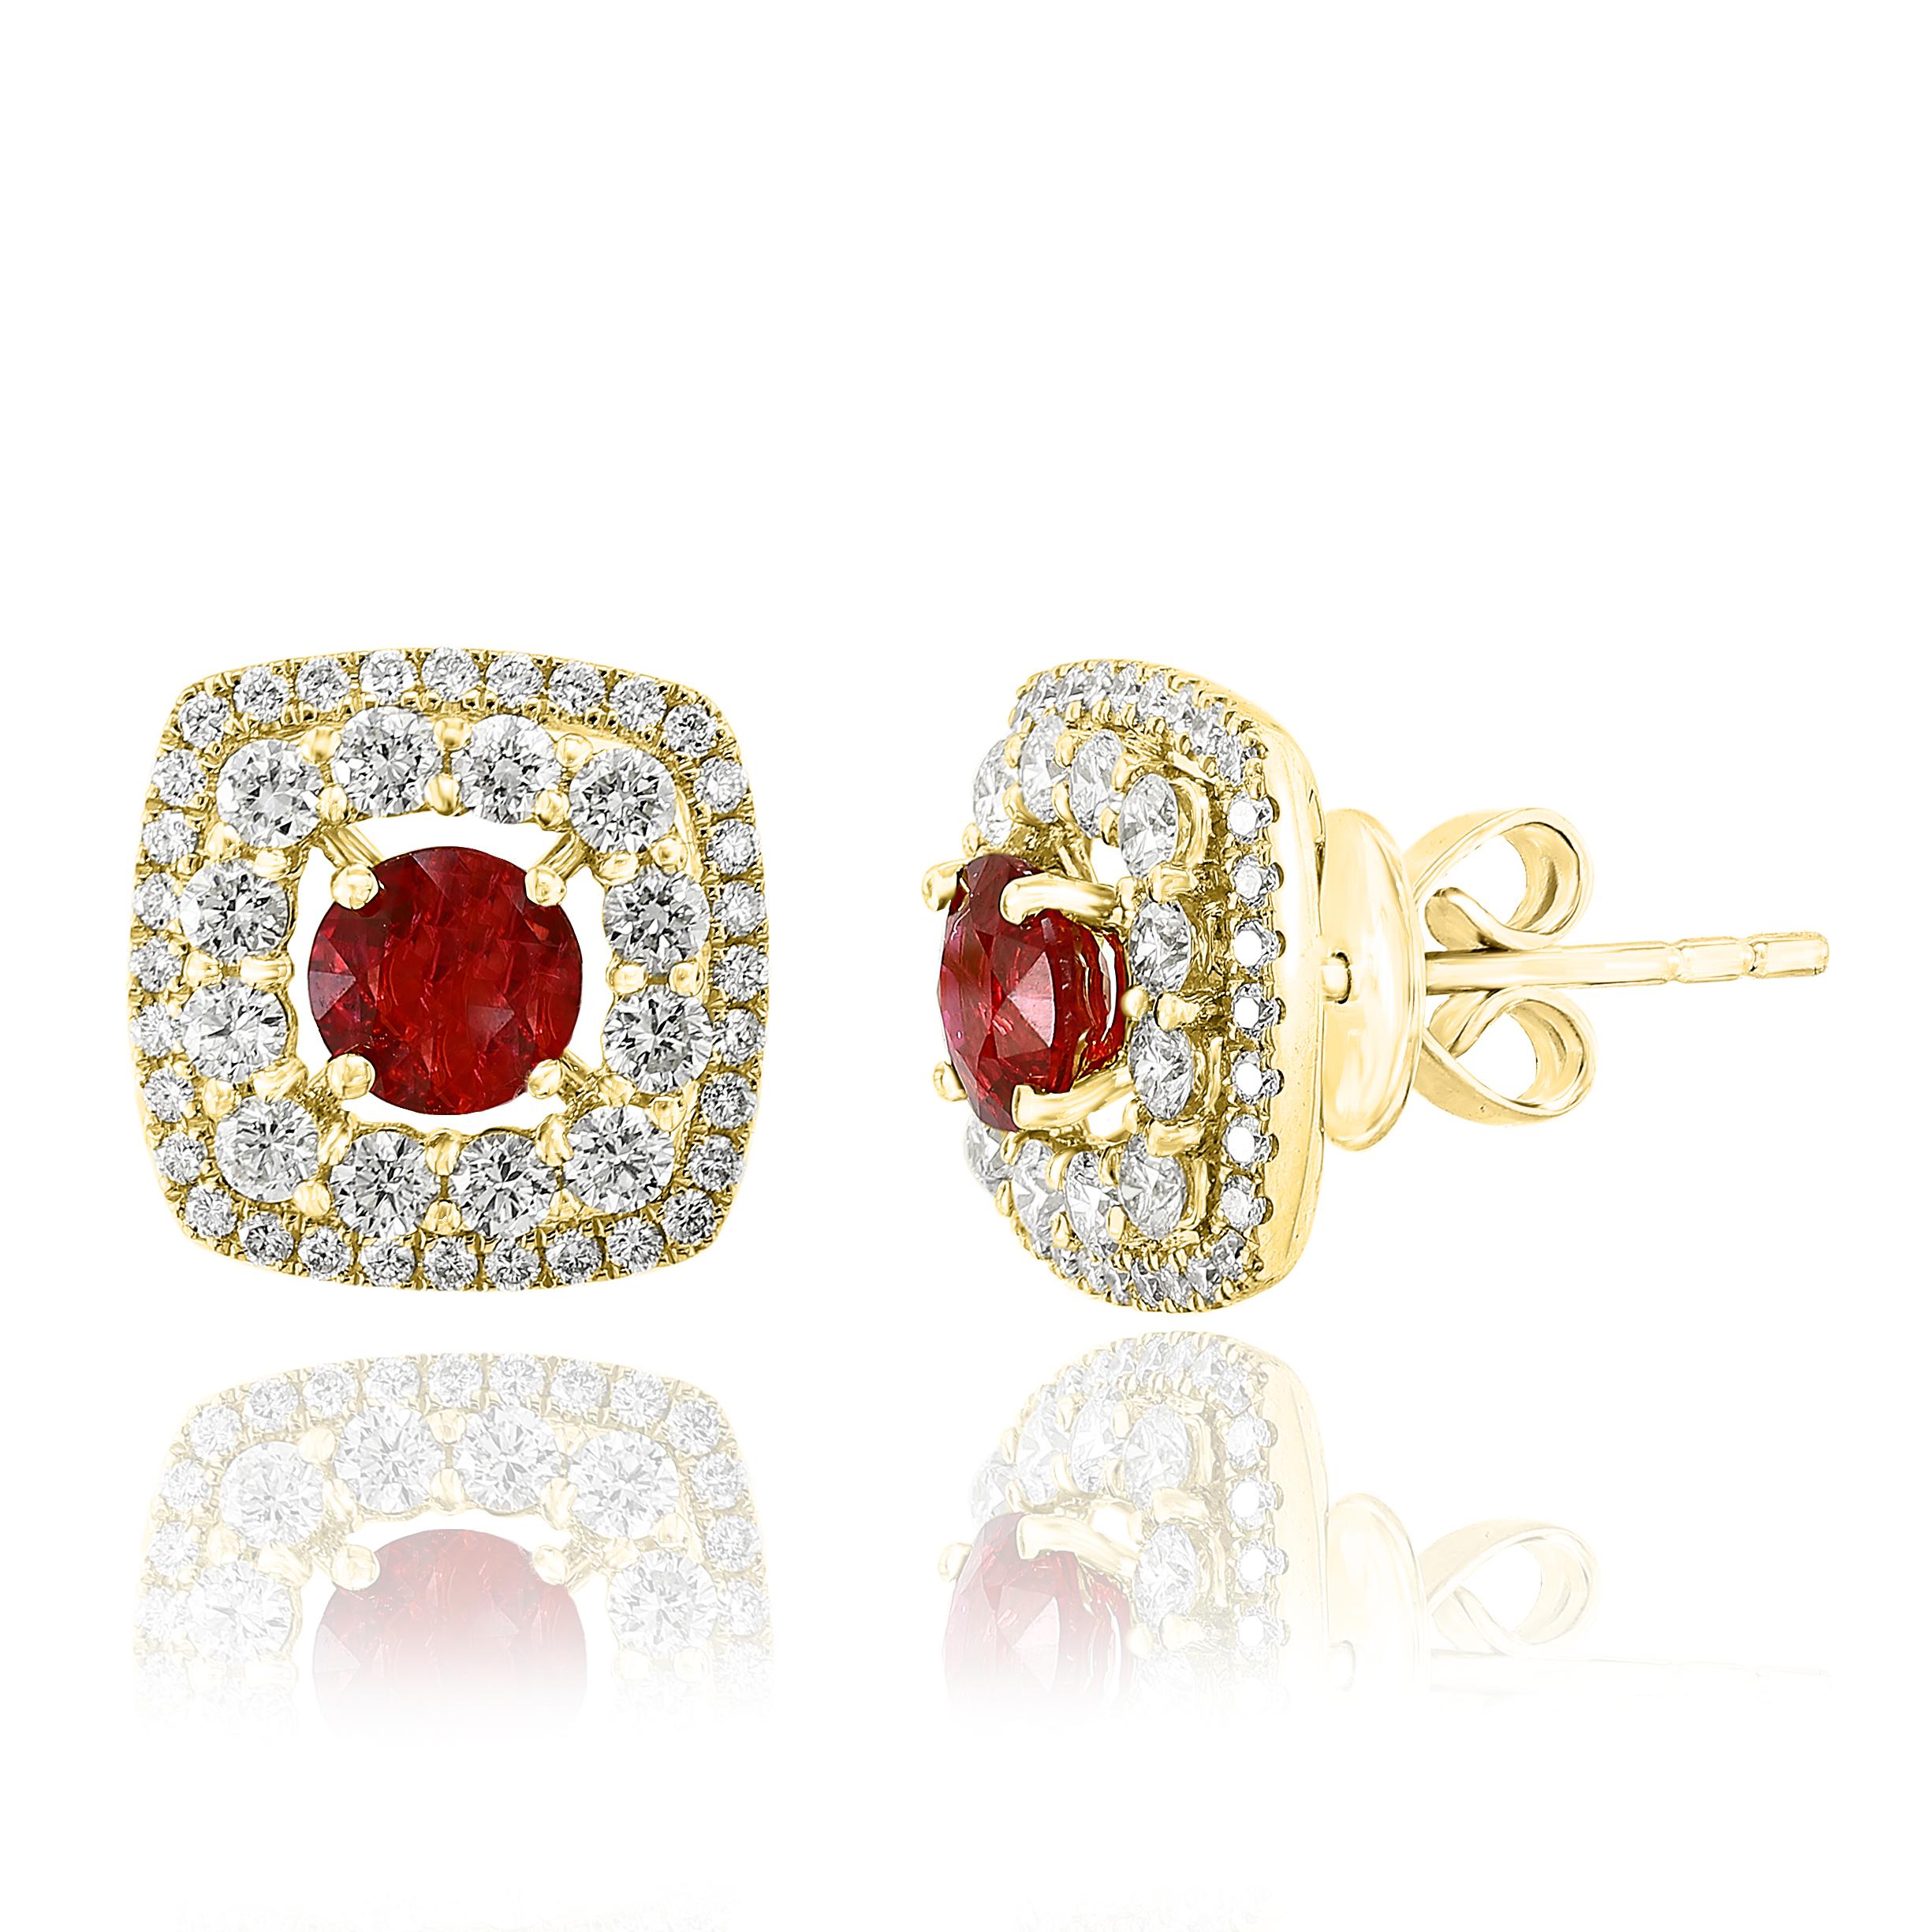 0.73 Carat Round Cut Ruby and Diamond Stud Earrings in 18K Yellow Gold In New Condition For Sale In NEW YORK, NY